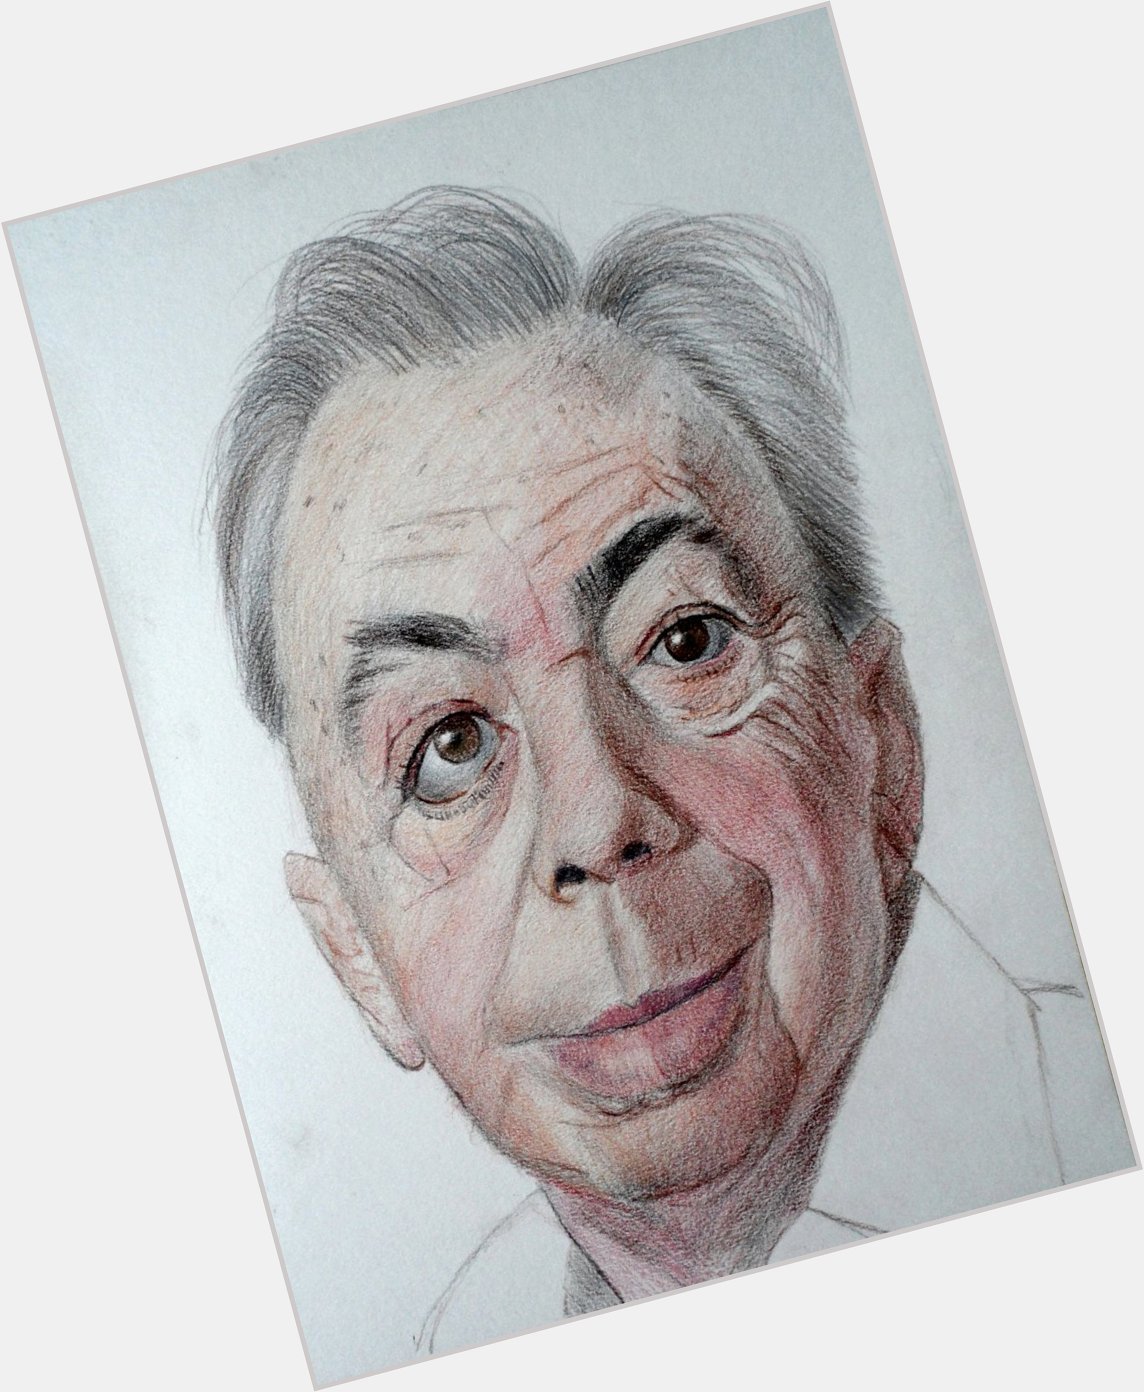 Happy Birthday Andrew Lloyd Webber . perhaps you could pass him my best wishes! 